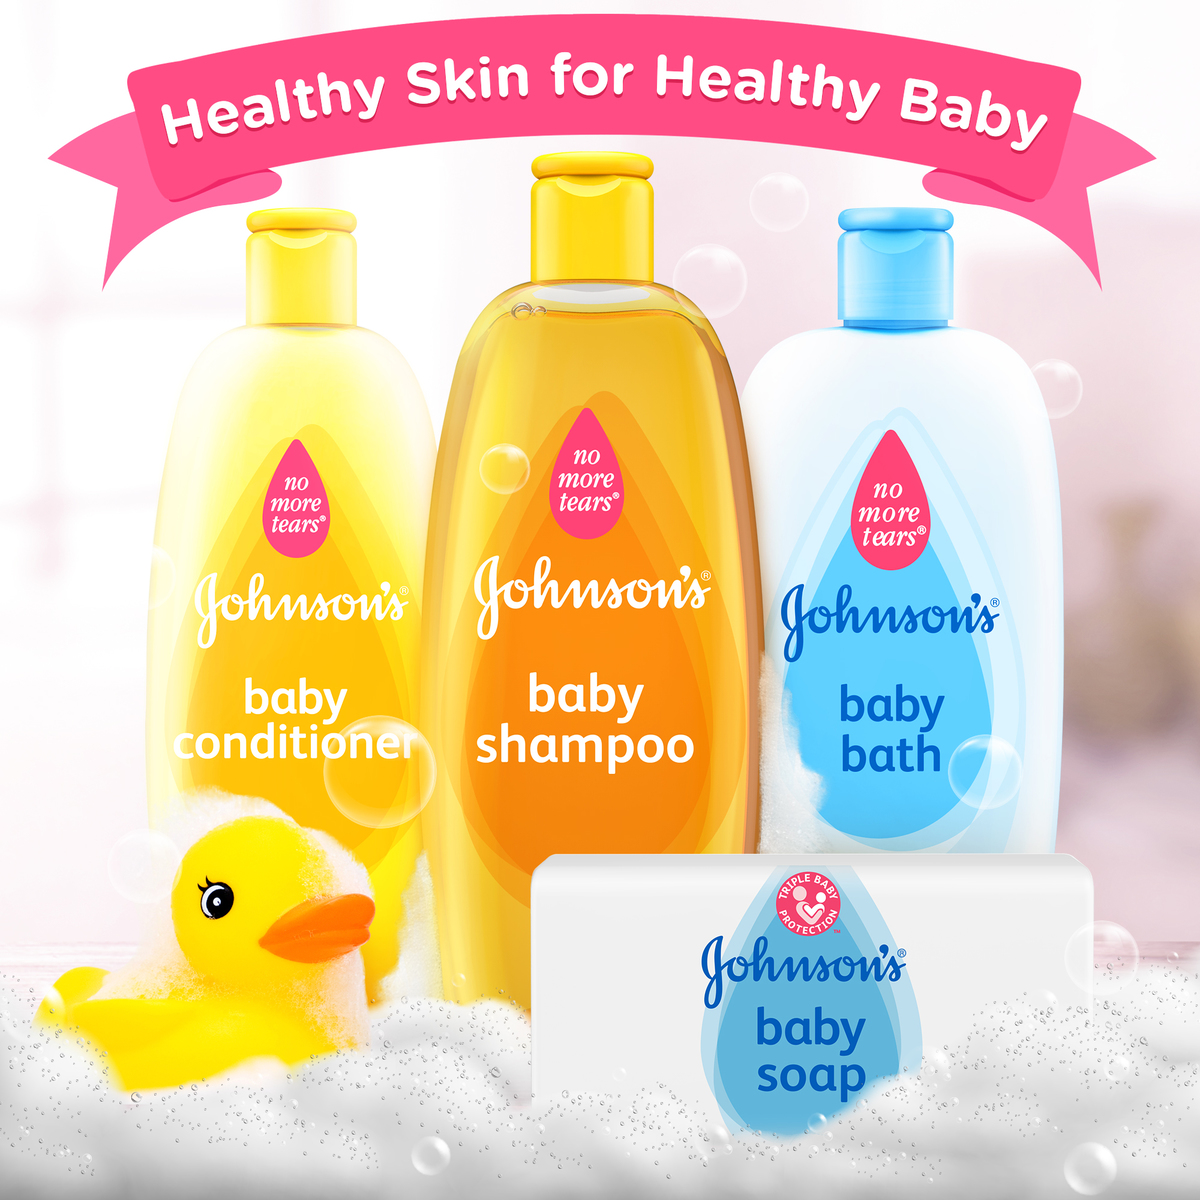 Johnson's Baby Soap with Baby Oil 6 x 125 g